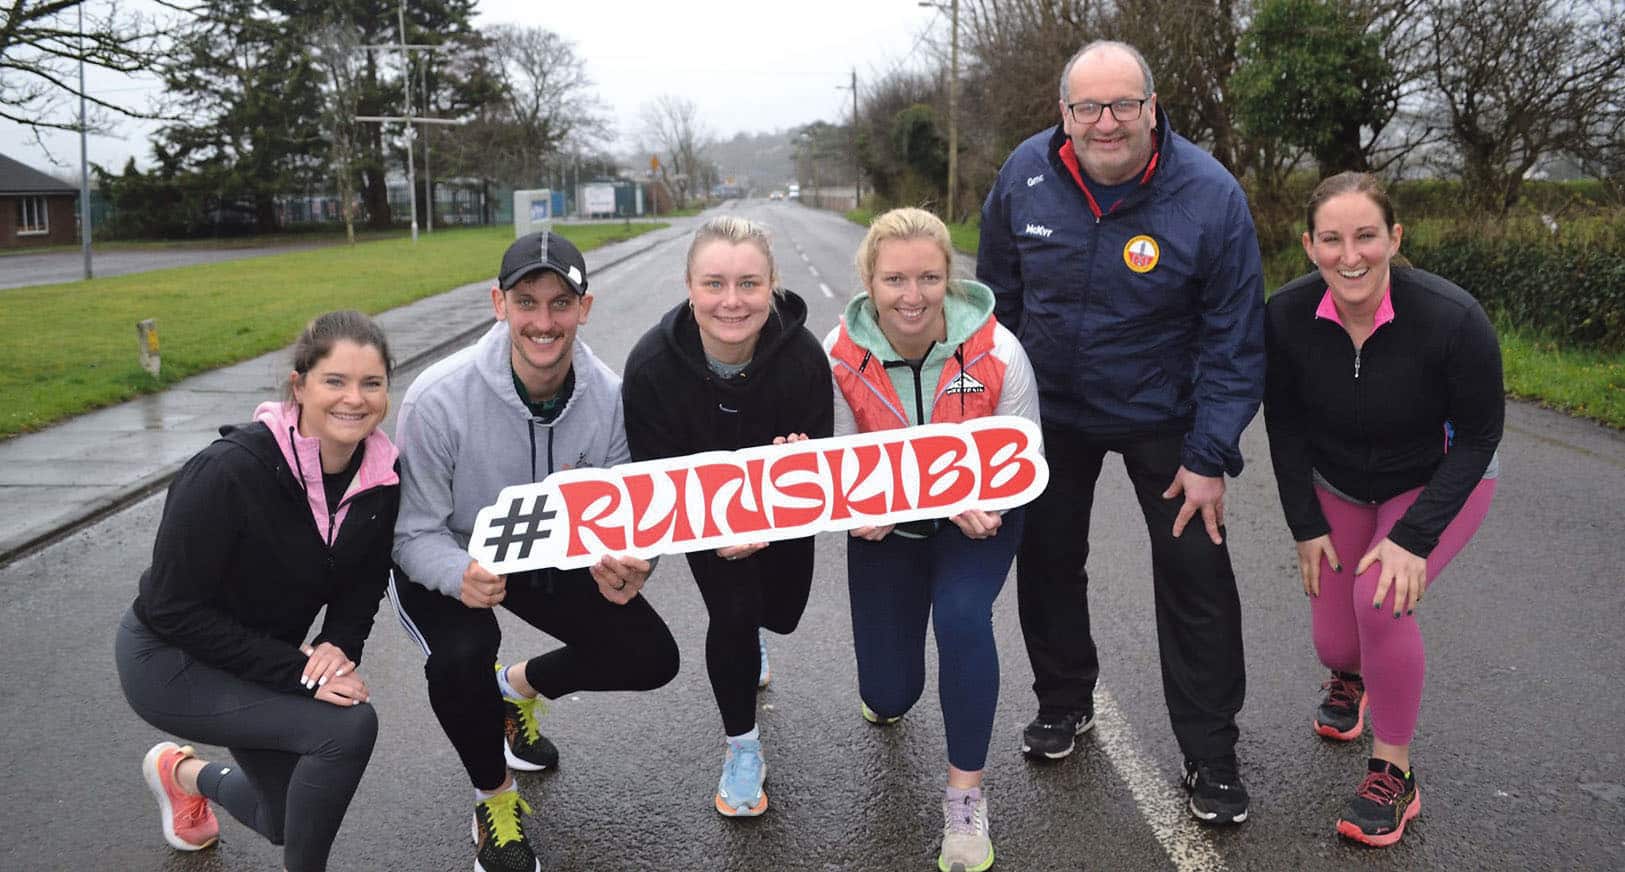 Skibbereen launches exciting new running event